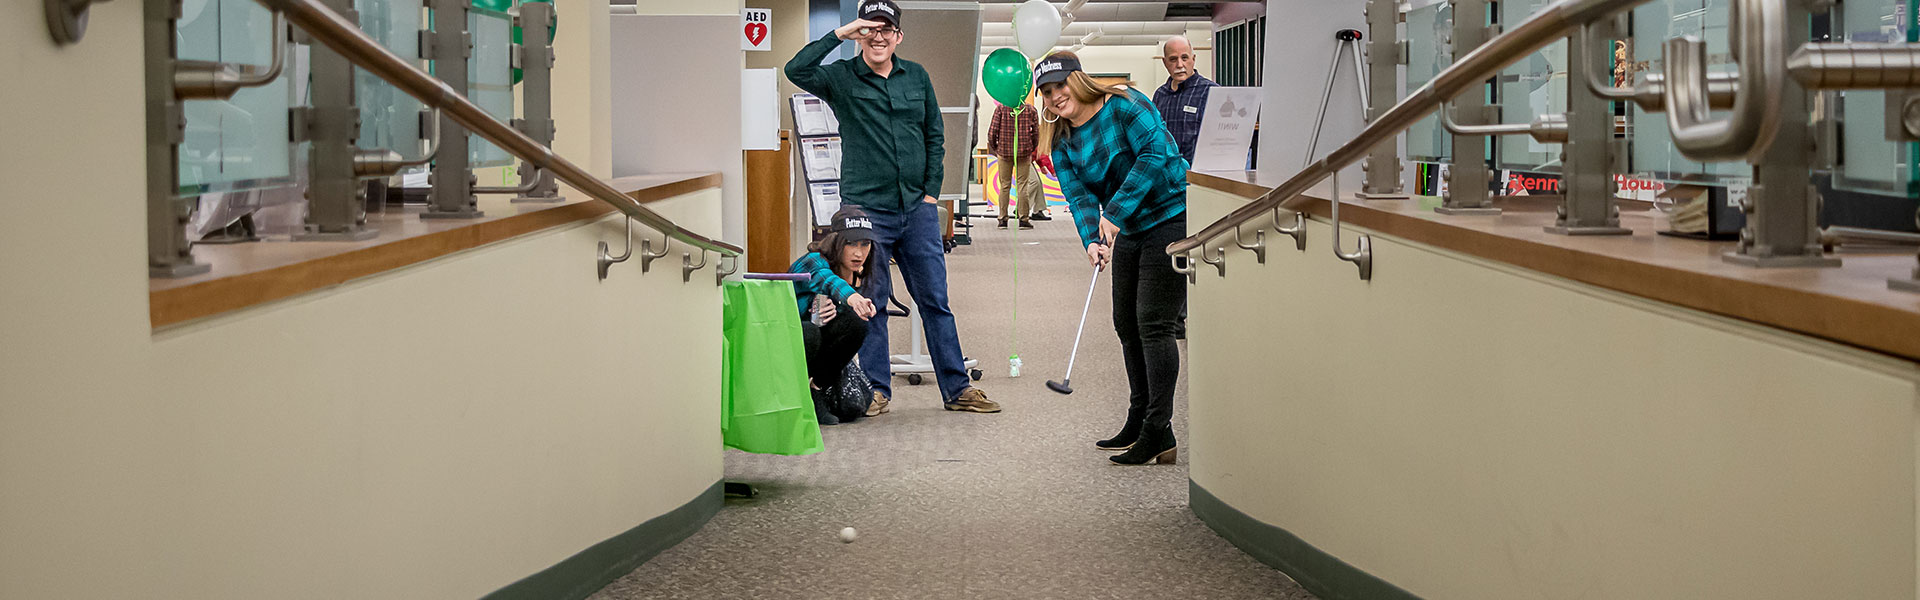 People playing mini golf at Wheaton Public library